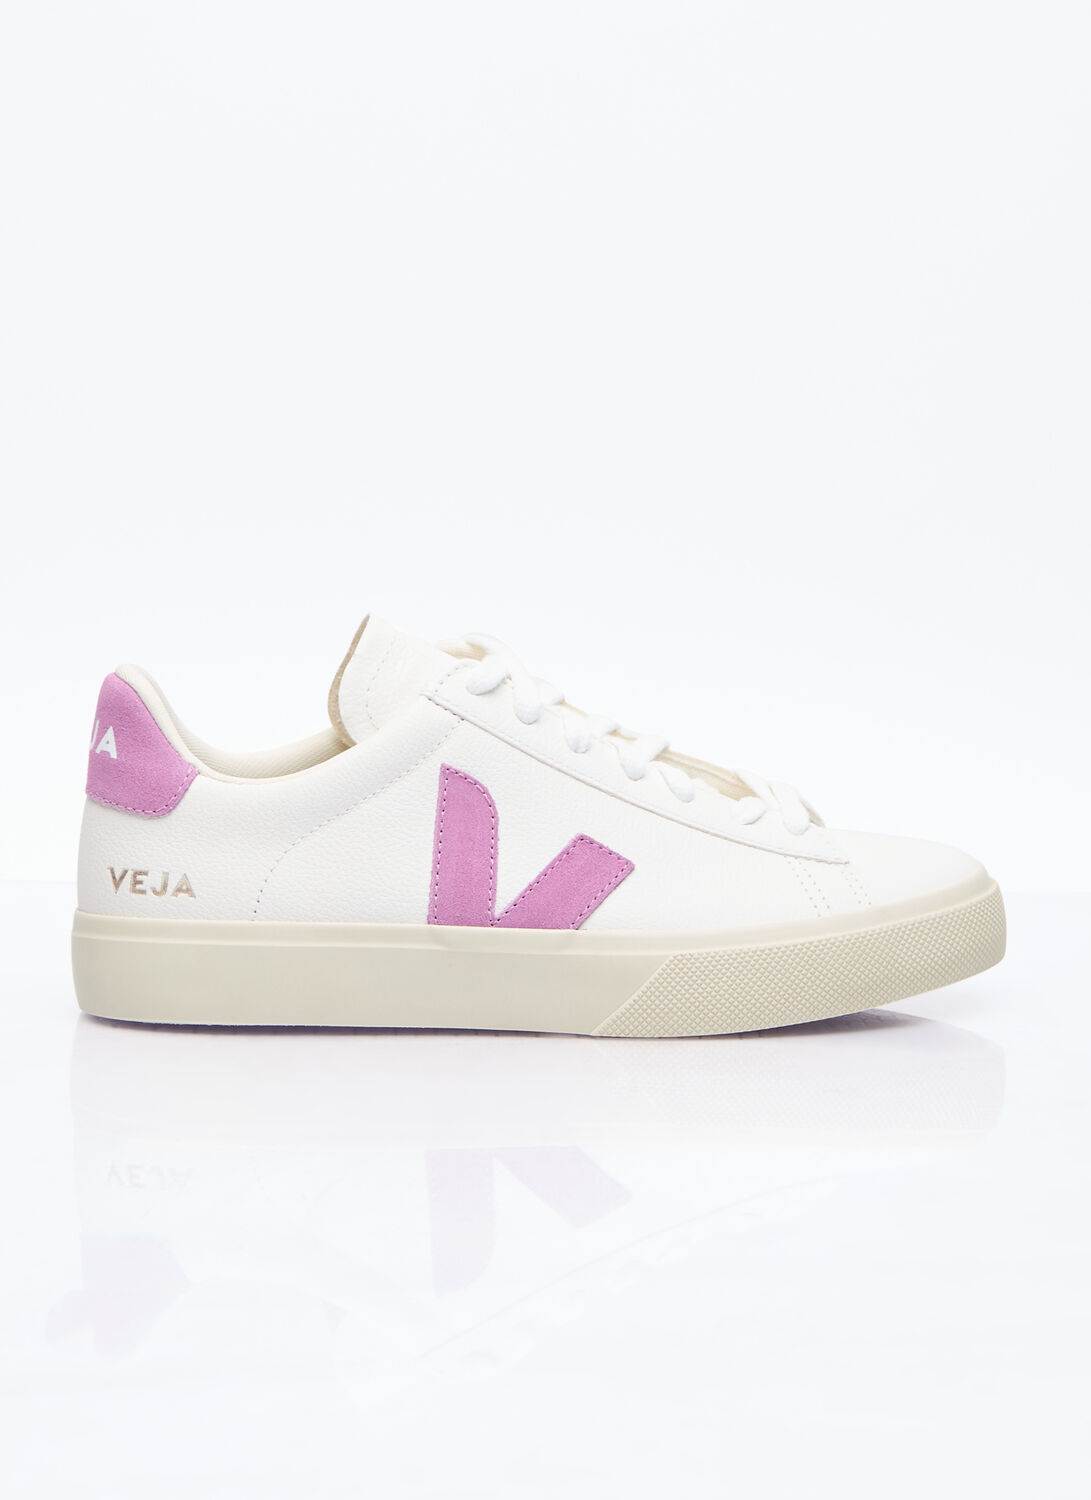 VEJA CAMPO CHROMEFREE LEATHER trainers